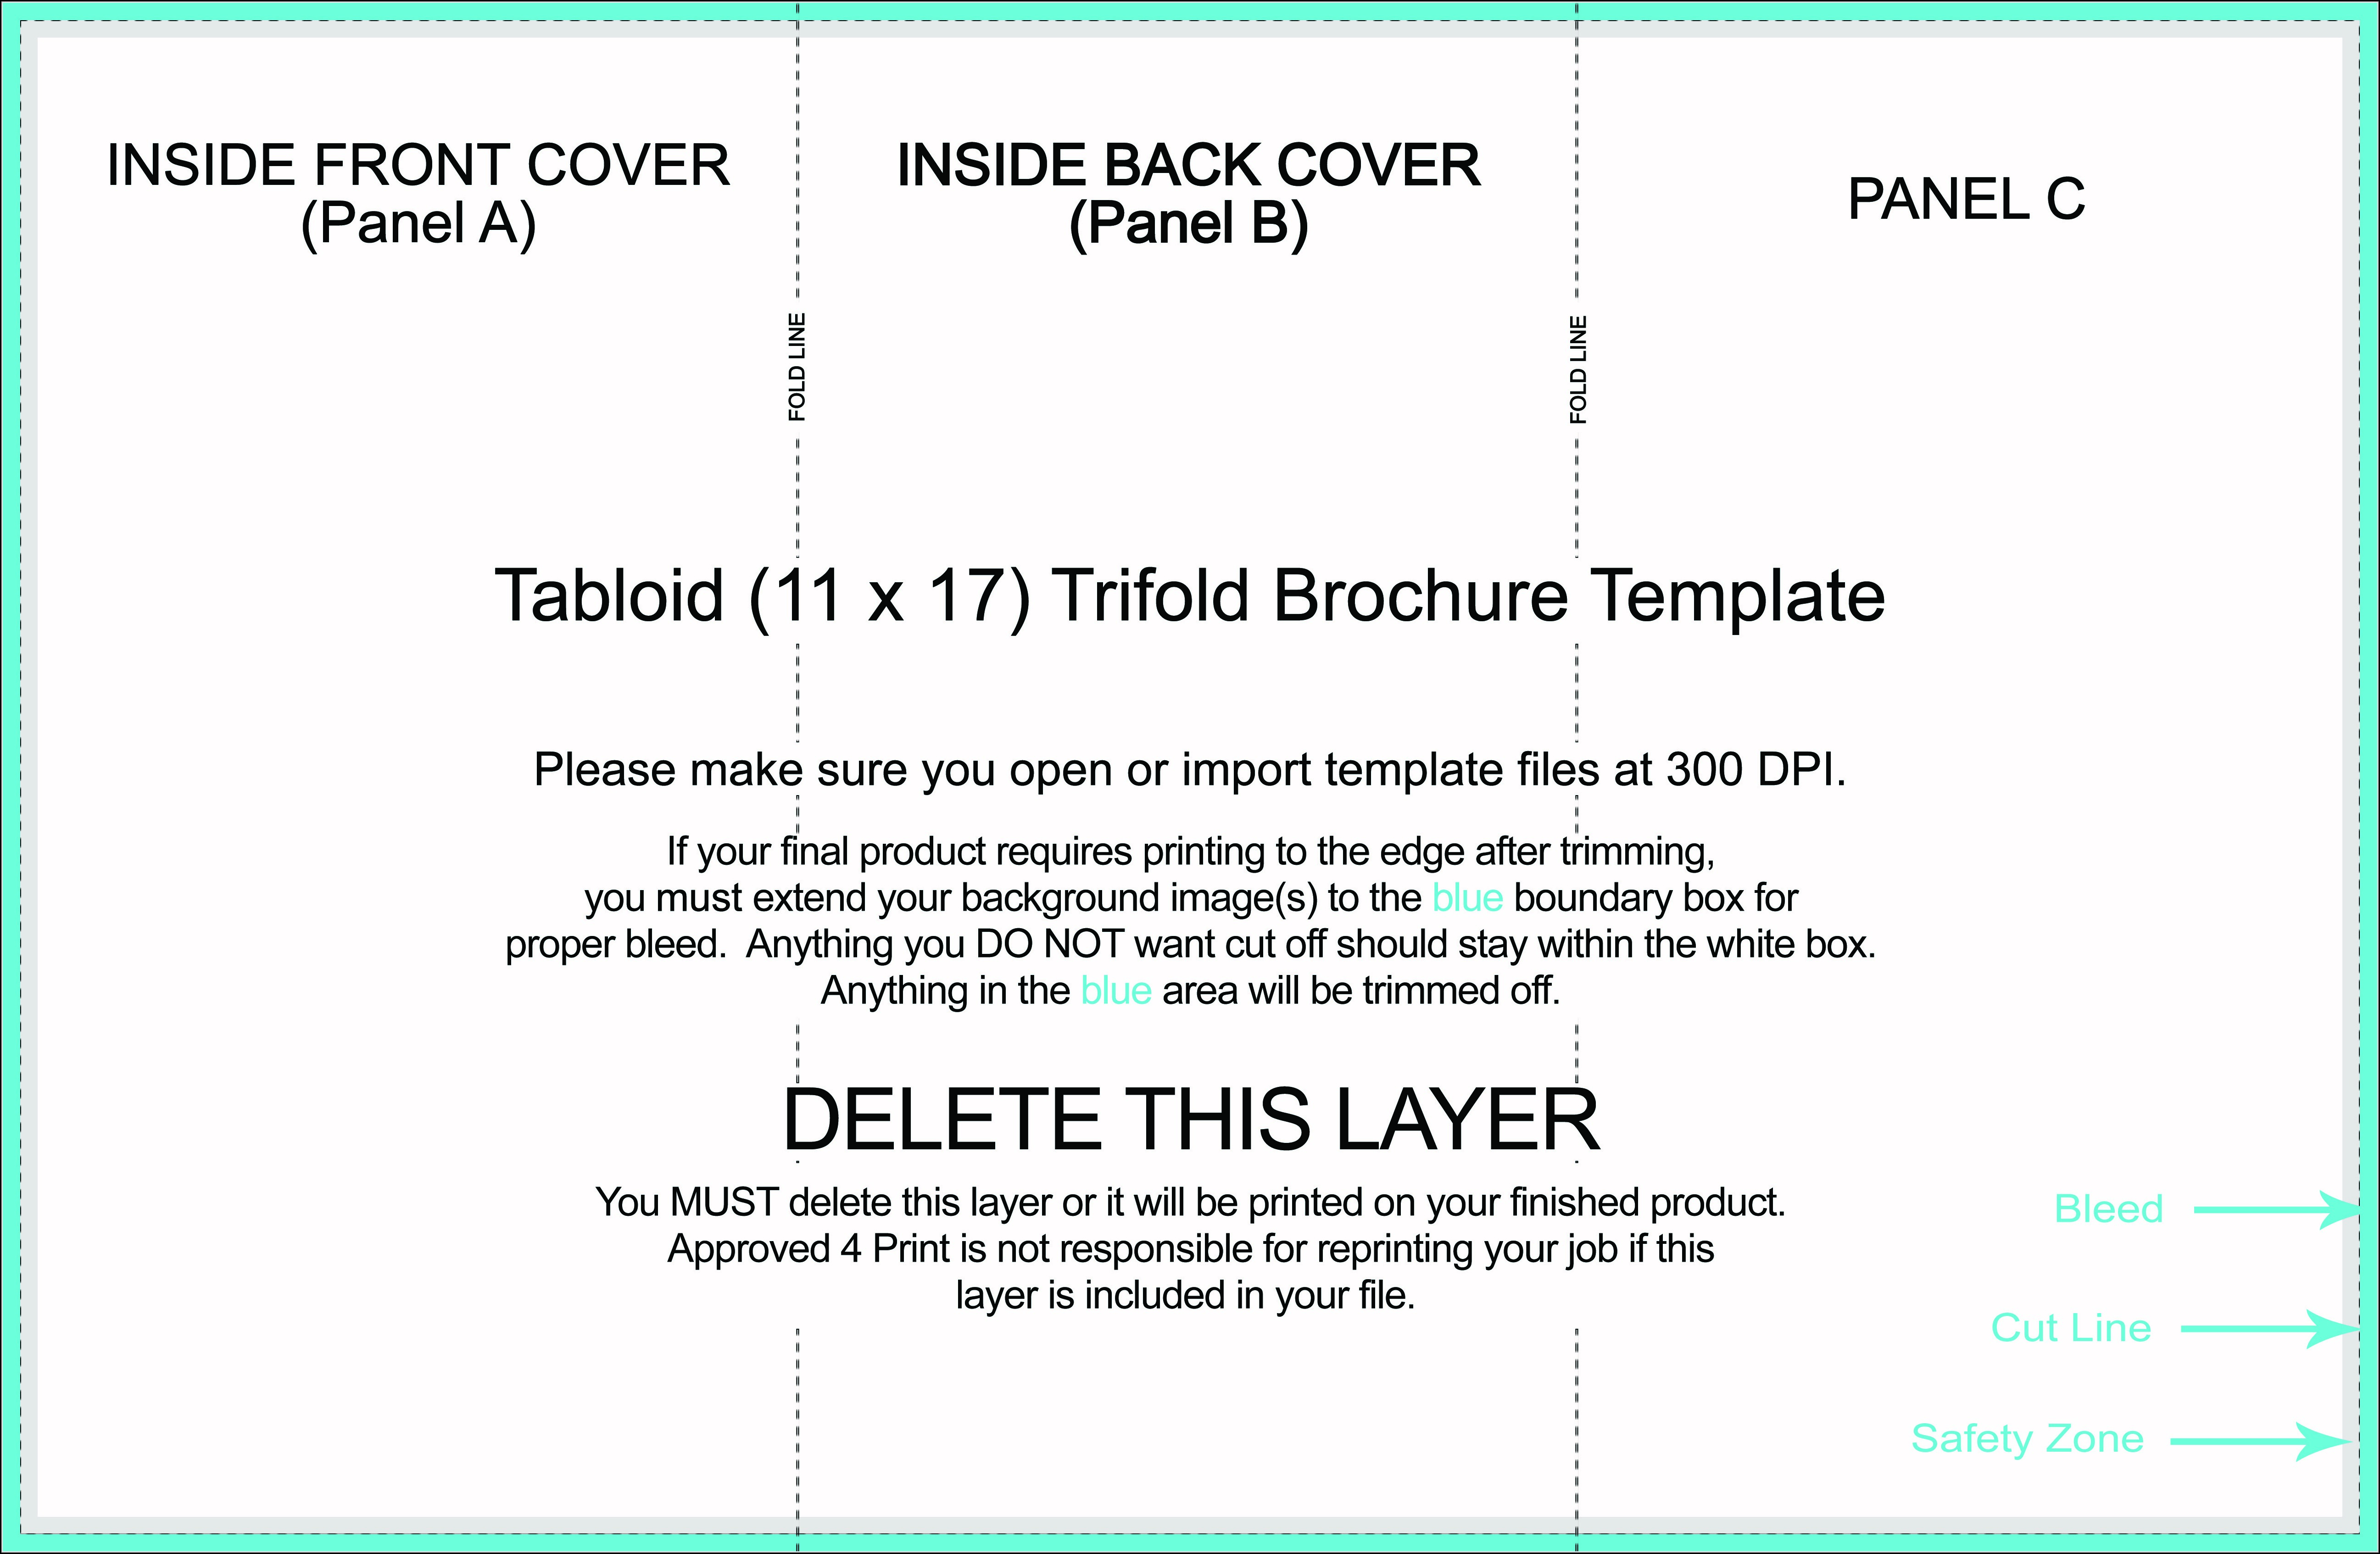 11x17-trifold-template-word-template-2-resume-examples-xm1eqxe1rl